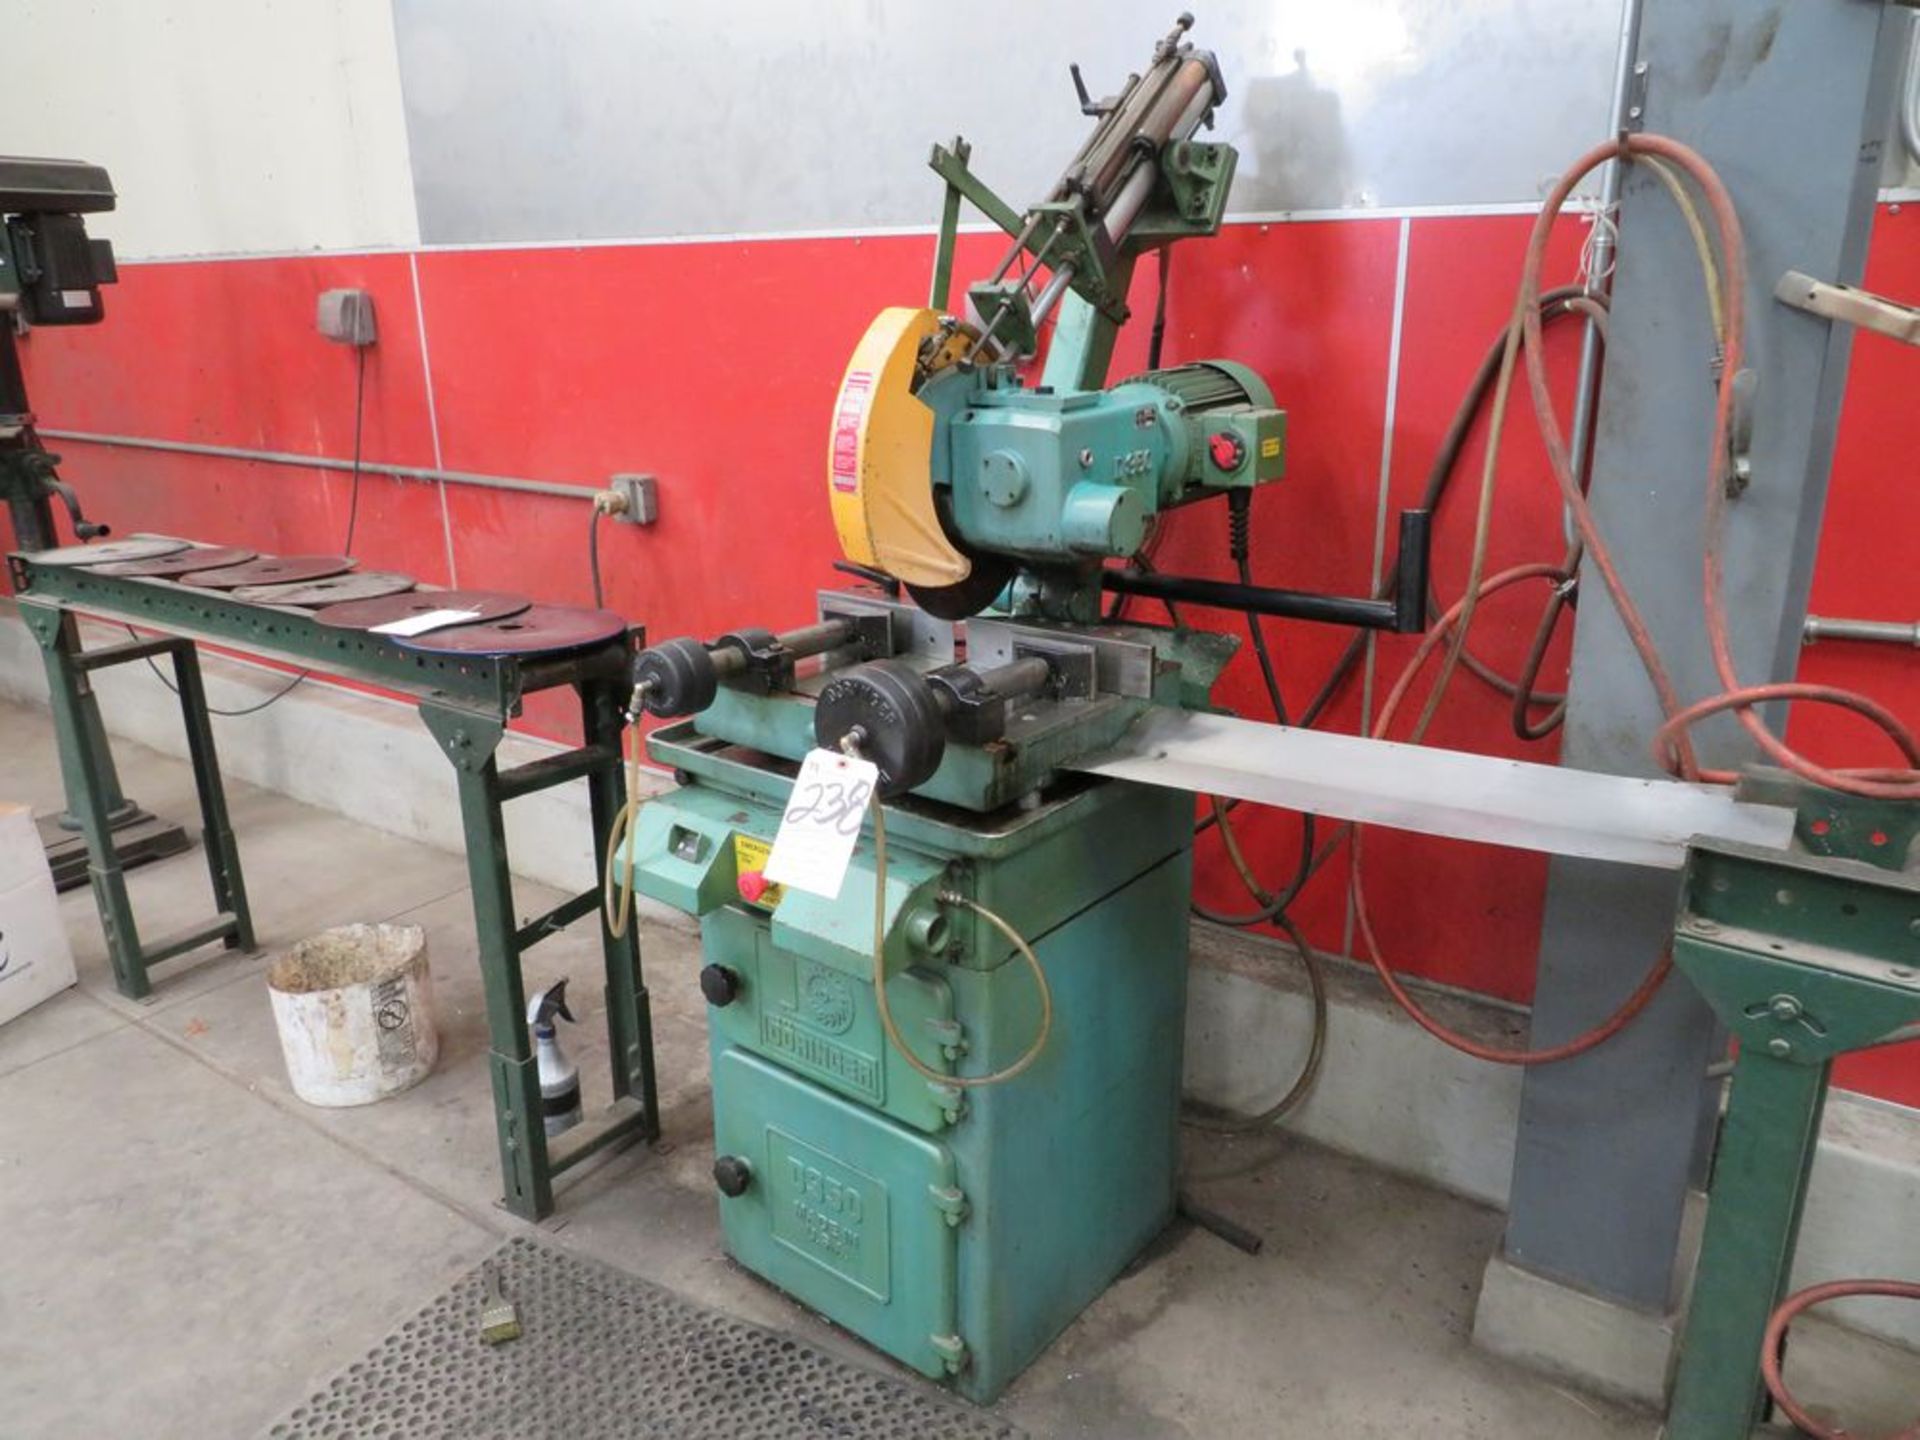 Doringer mod. D350, 12" Cold Saw w/ Twin Clamping, Infeed & Outfeed - Image 2 of 5